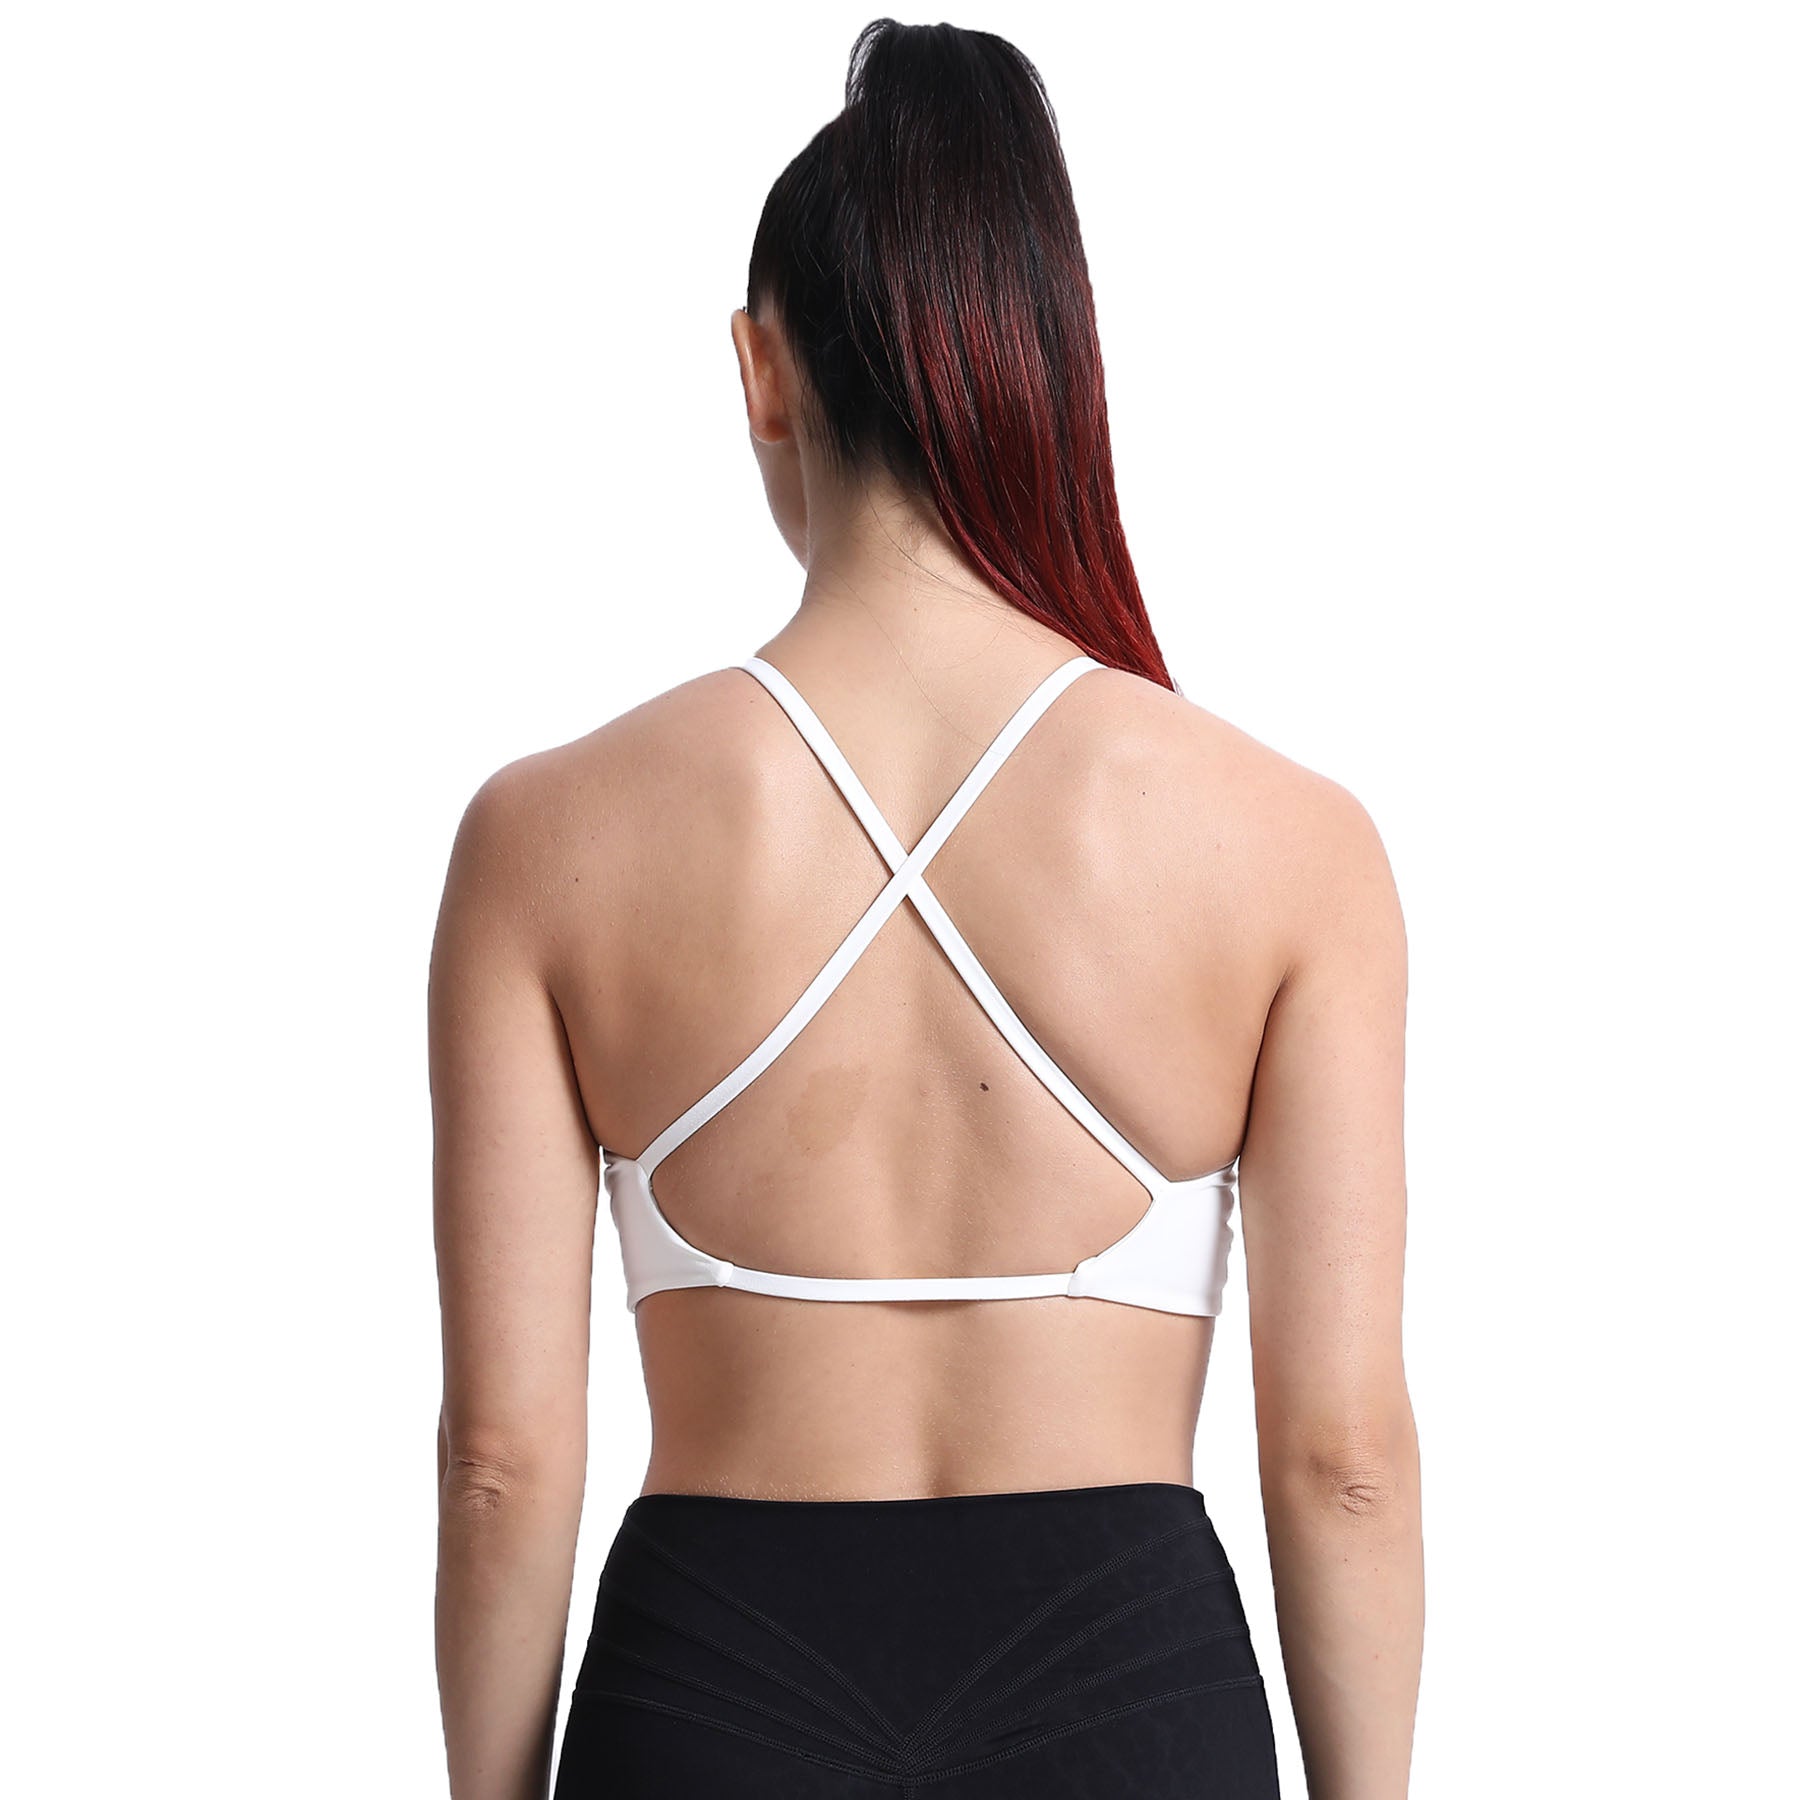 Buy Aoxjox Women's Workout Sports Bras Fitness Backless Padded Sienna Low  Impact Bra Yoga Crop Tank Top, White, S at